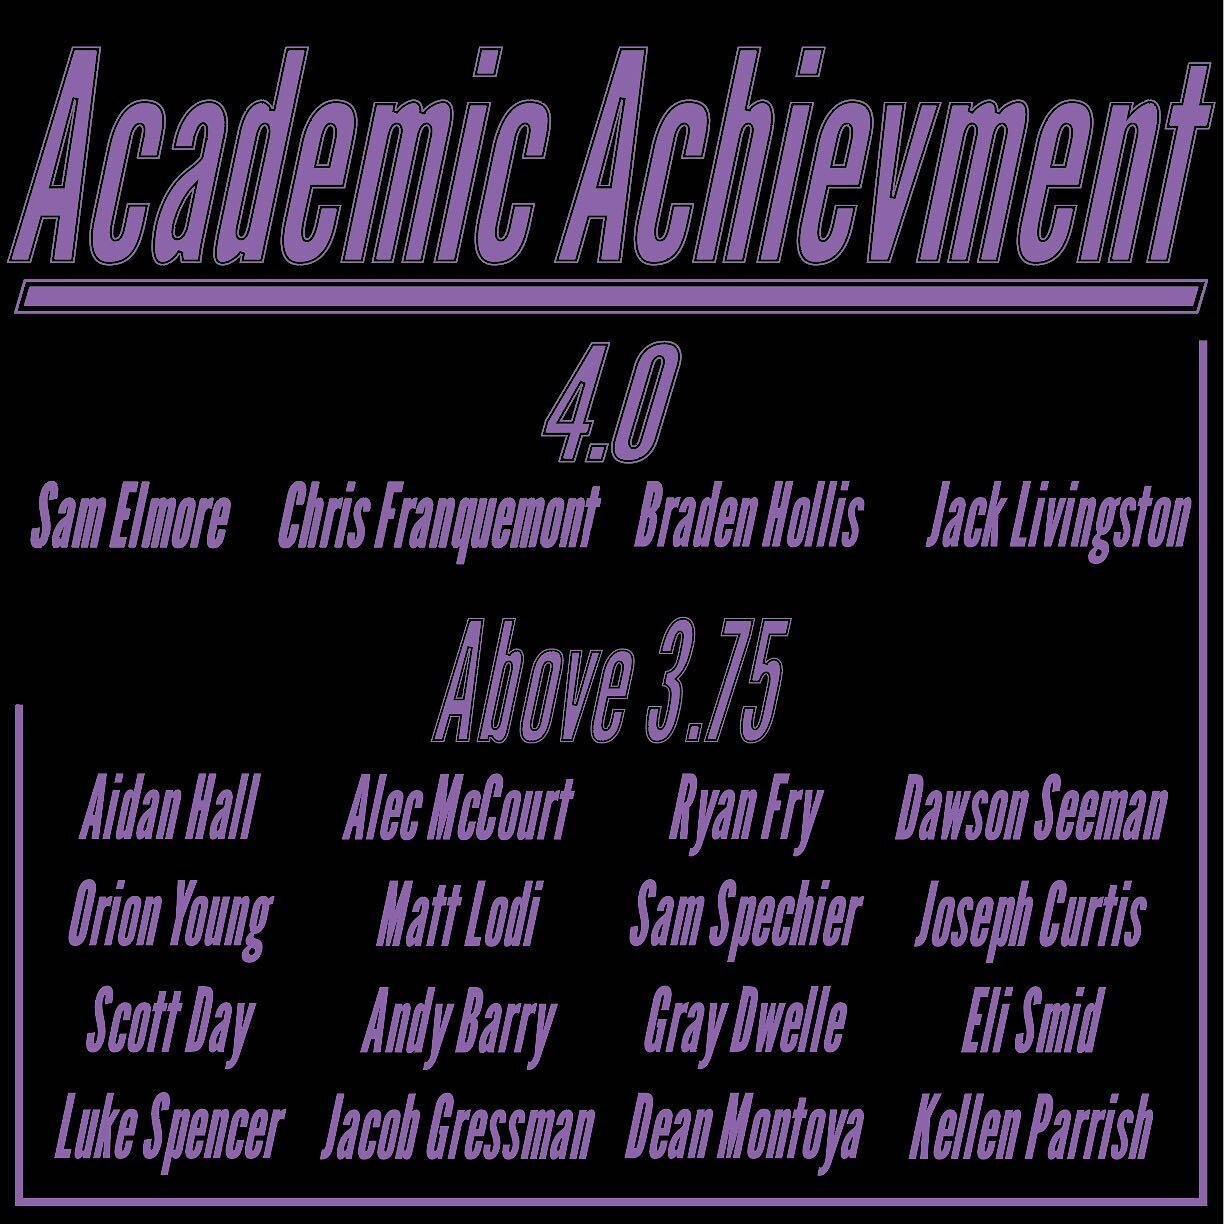 Congratulations to the Brothers with high academic achievement! Rush and join our brothers in achieving academic excellence.

🚨COUNTDOWN TO RUSH: 6 days🚨
Recruitment link in bio